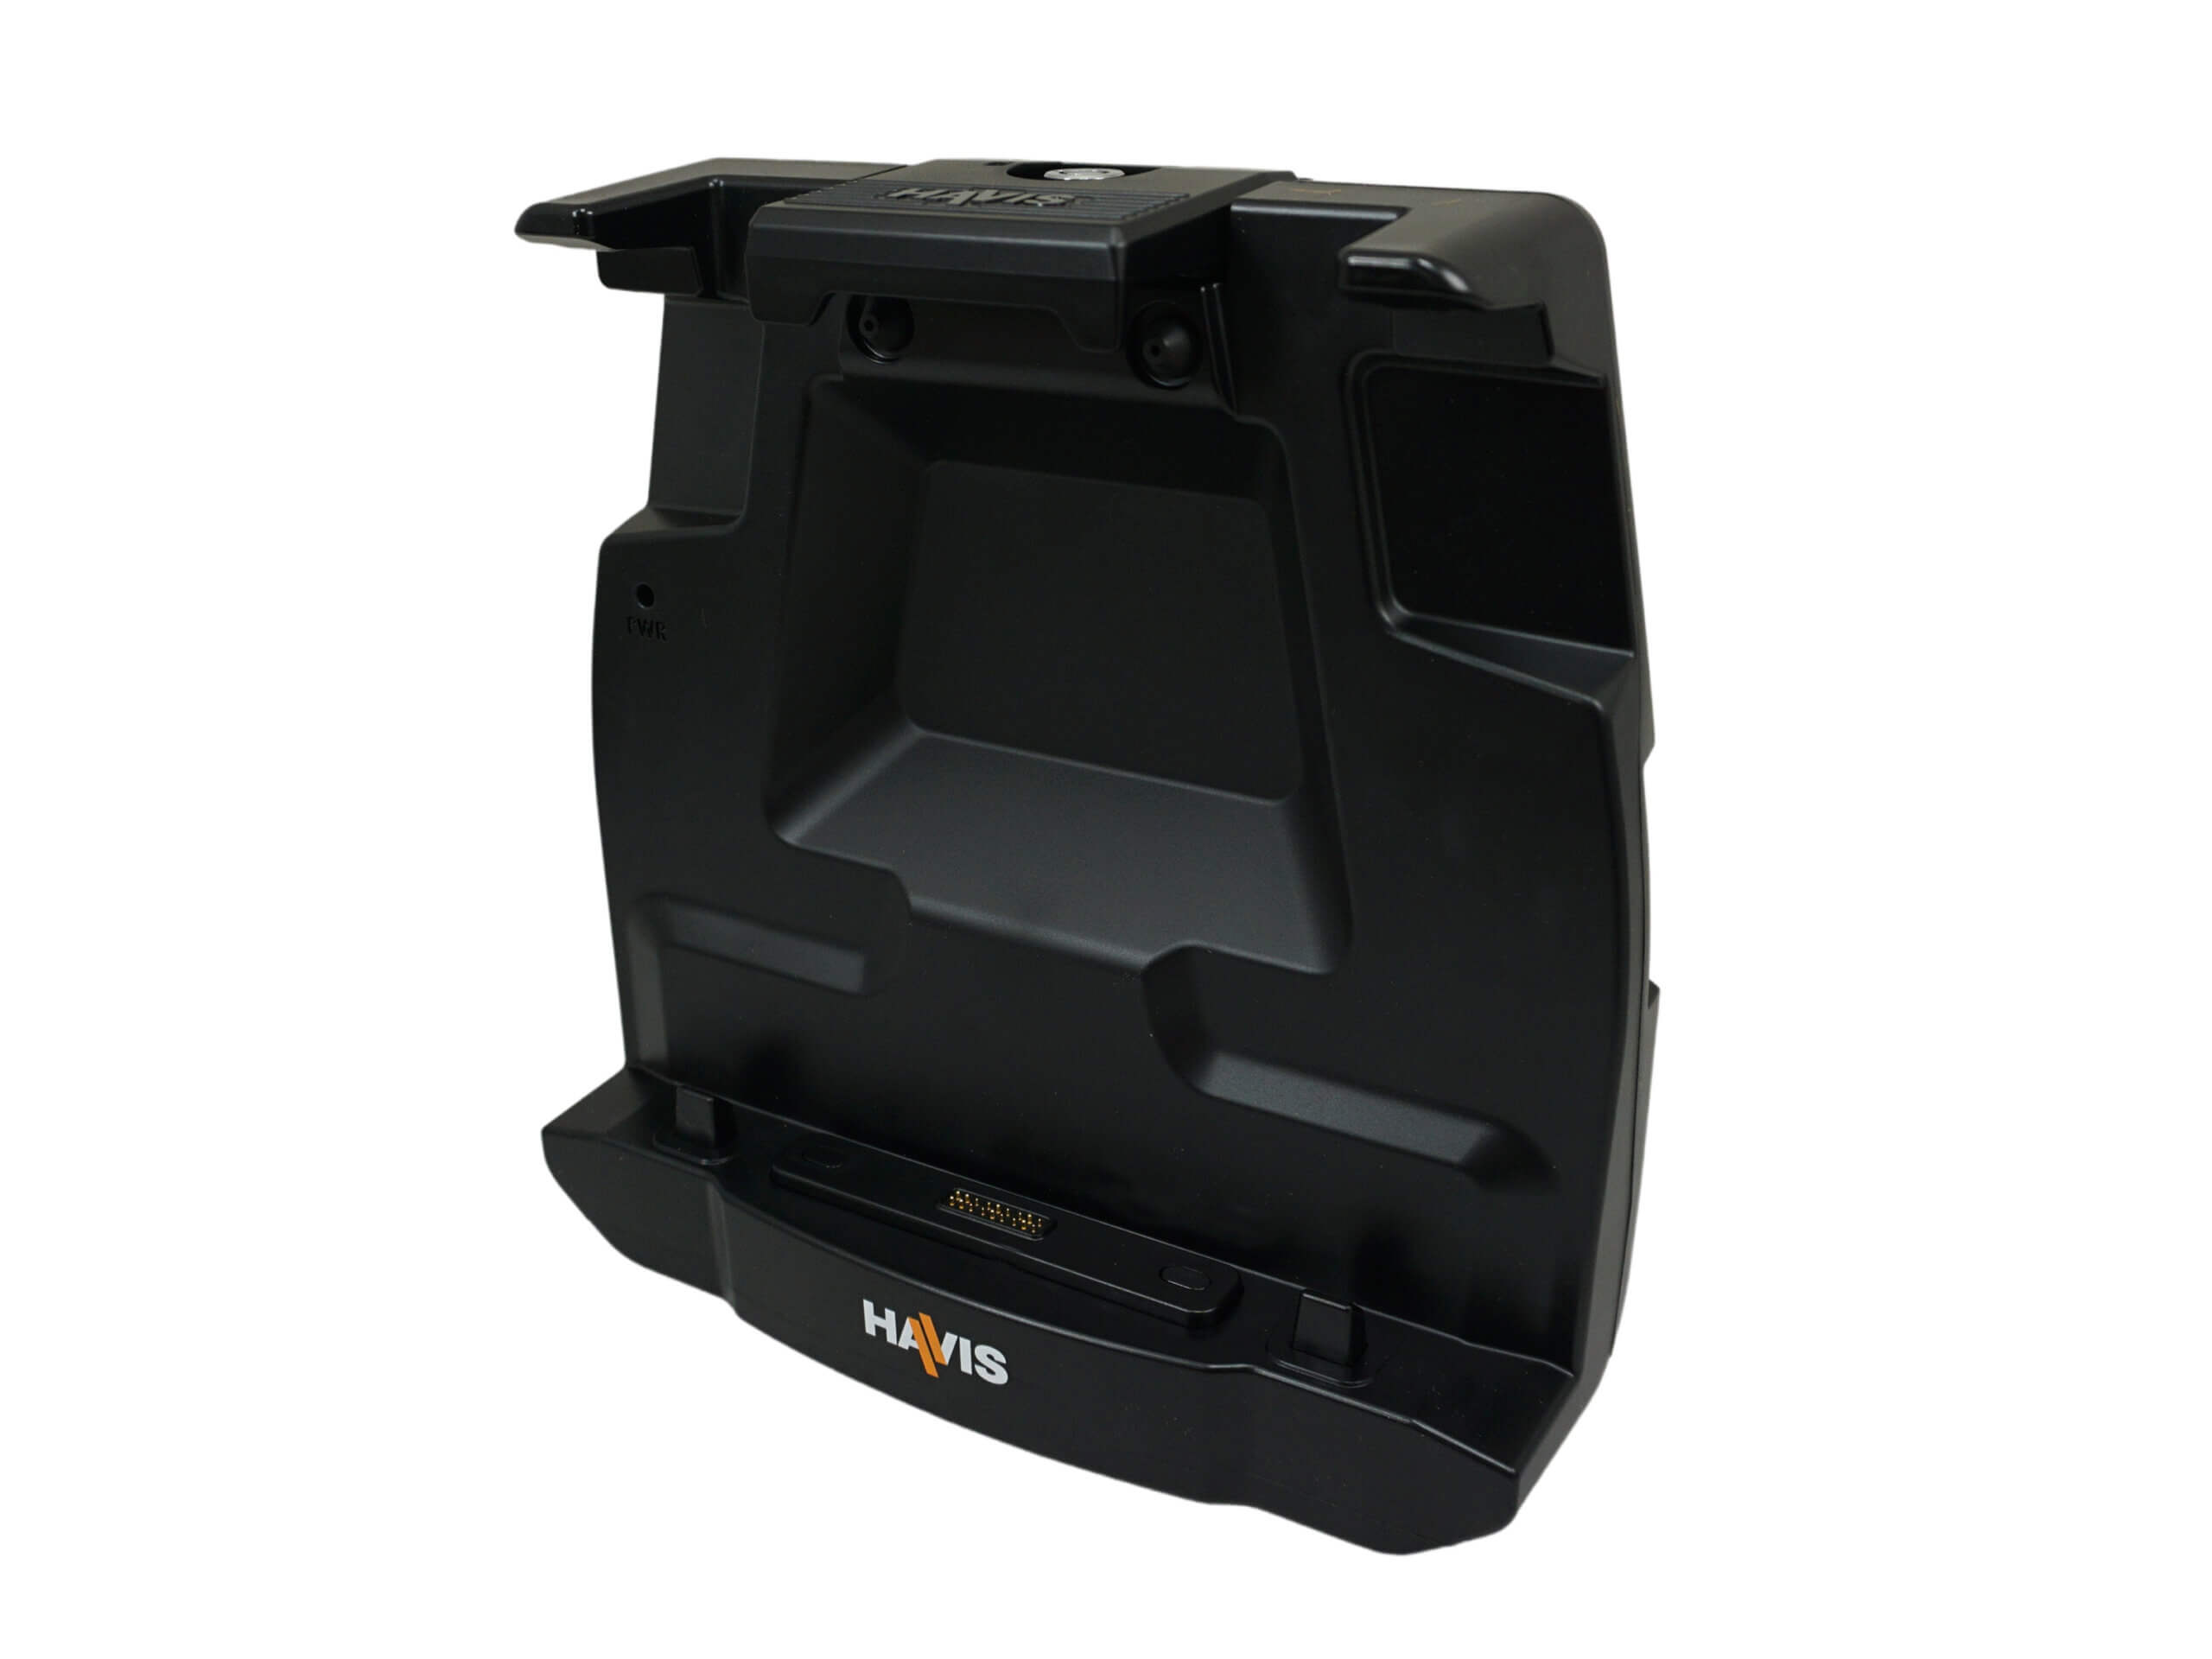 Docking Station for Dell’s 7230 Tablet with Standard Port Replication and Internal, Non-isolated Power Supply